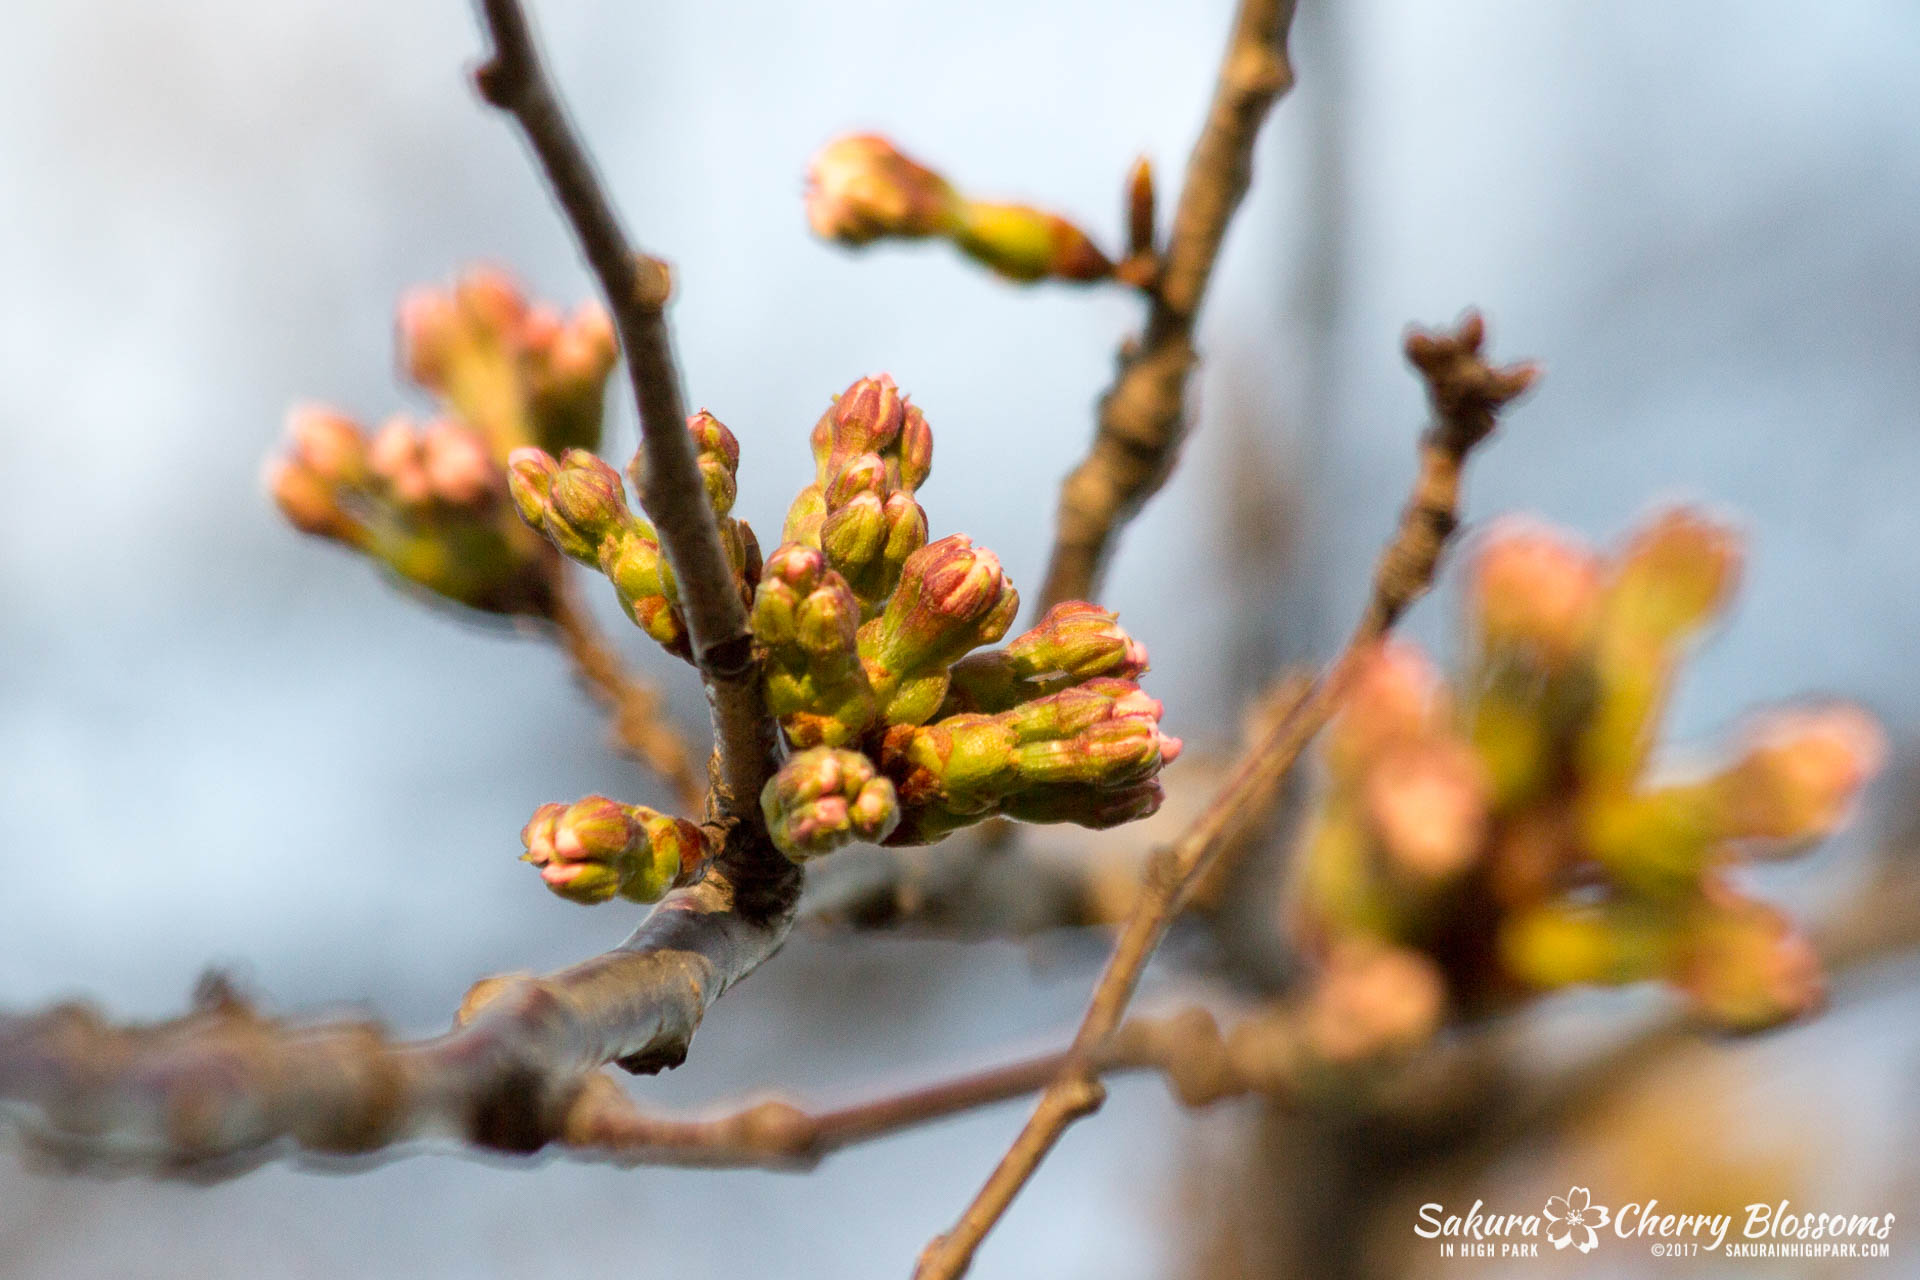 Sakura-in-High-Park-April-17-2017-florets-are-emerging-from-the-buds-throughout-the-park-7.jpg